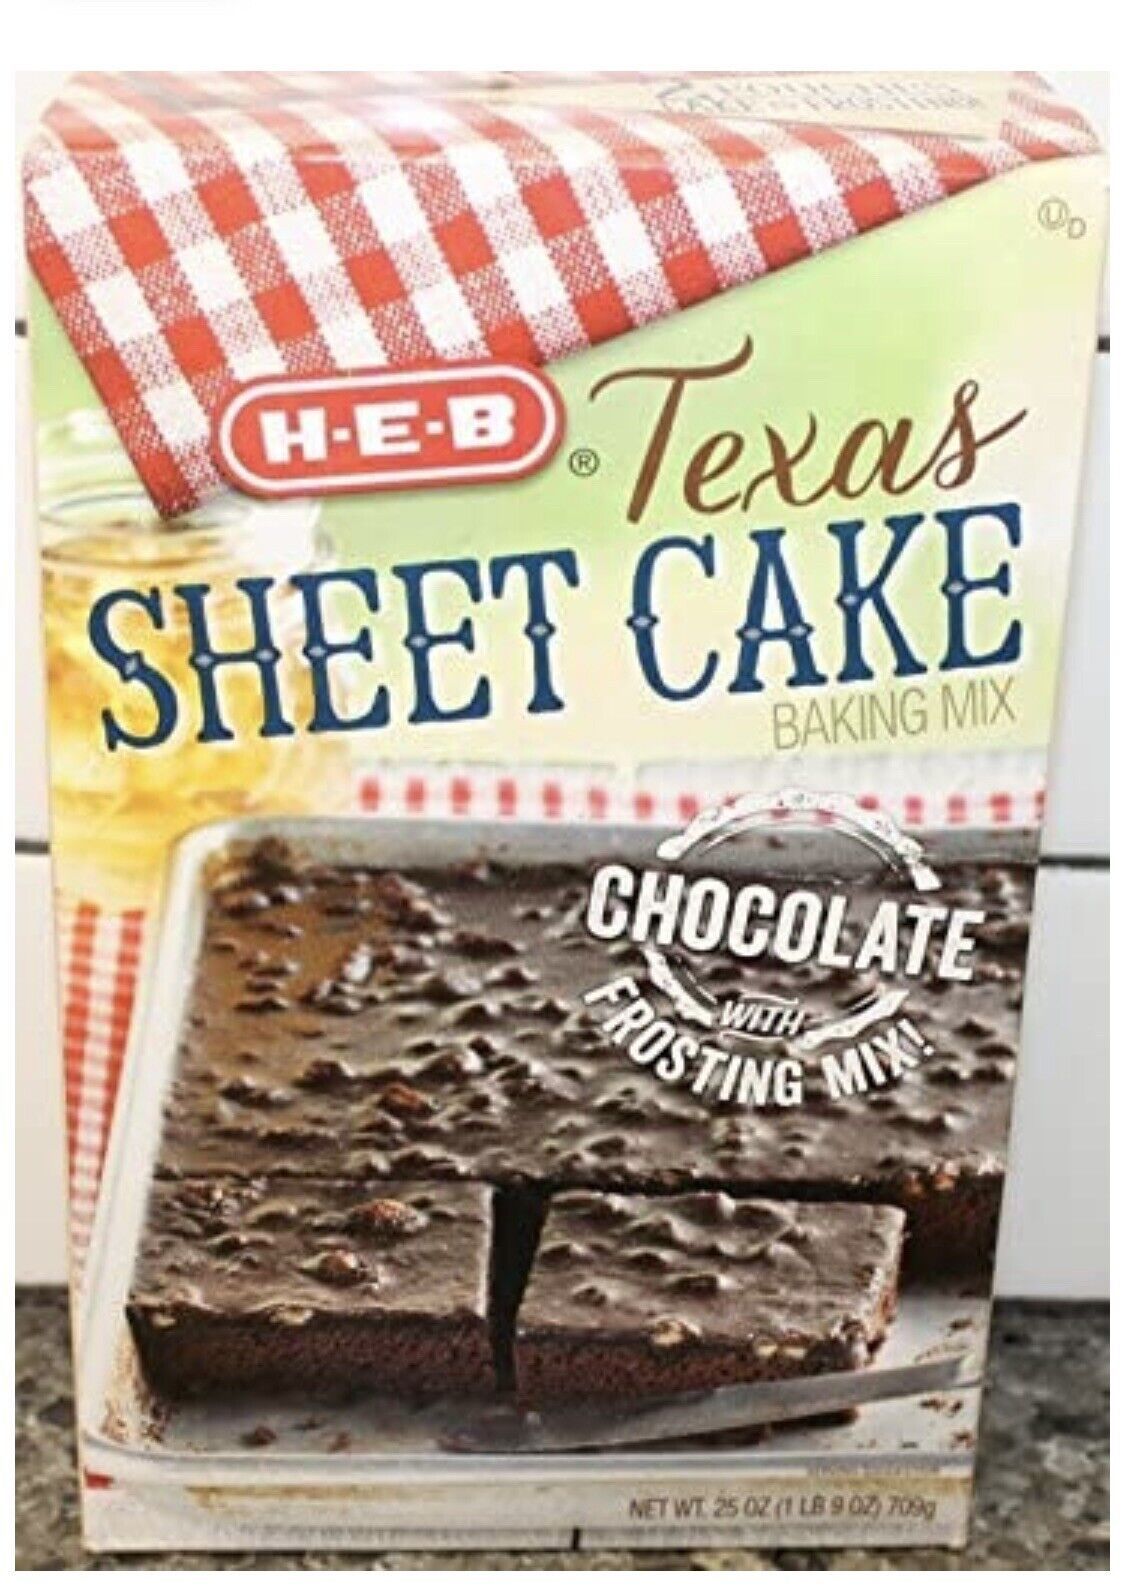 Primary image for HEB Texas Sheet Cake mix. 25 oz box pack of 1